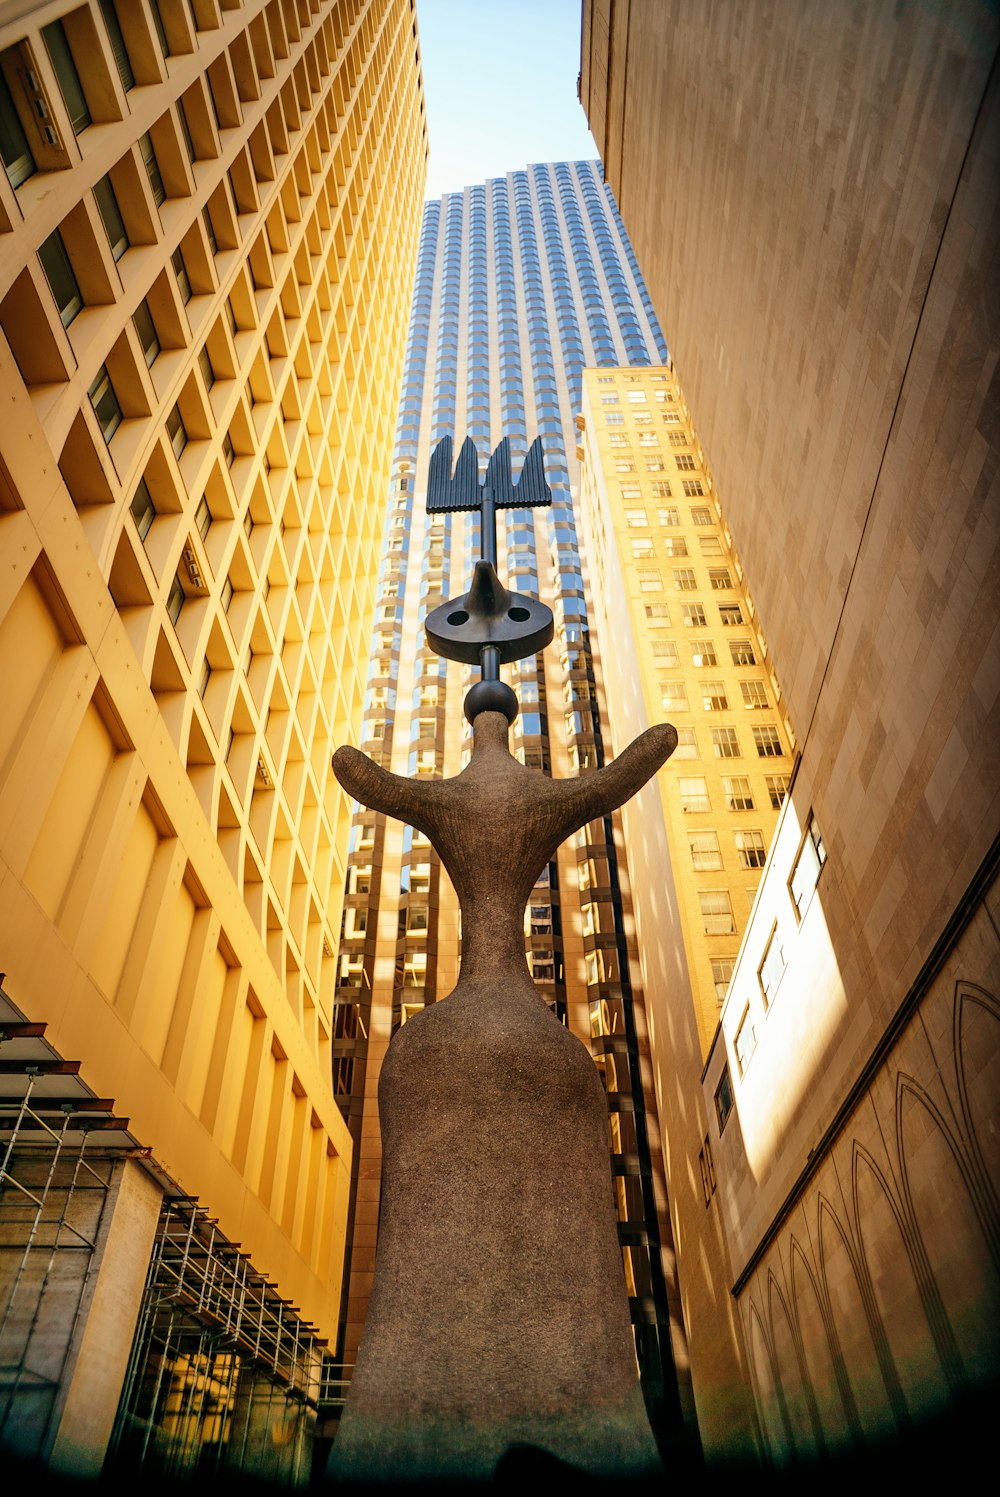 a statue in between tall buildings